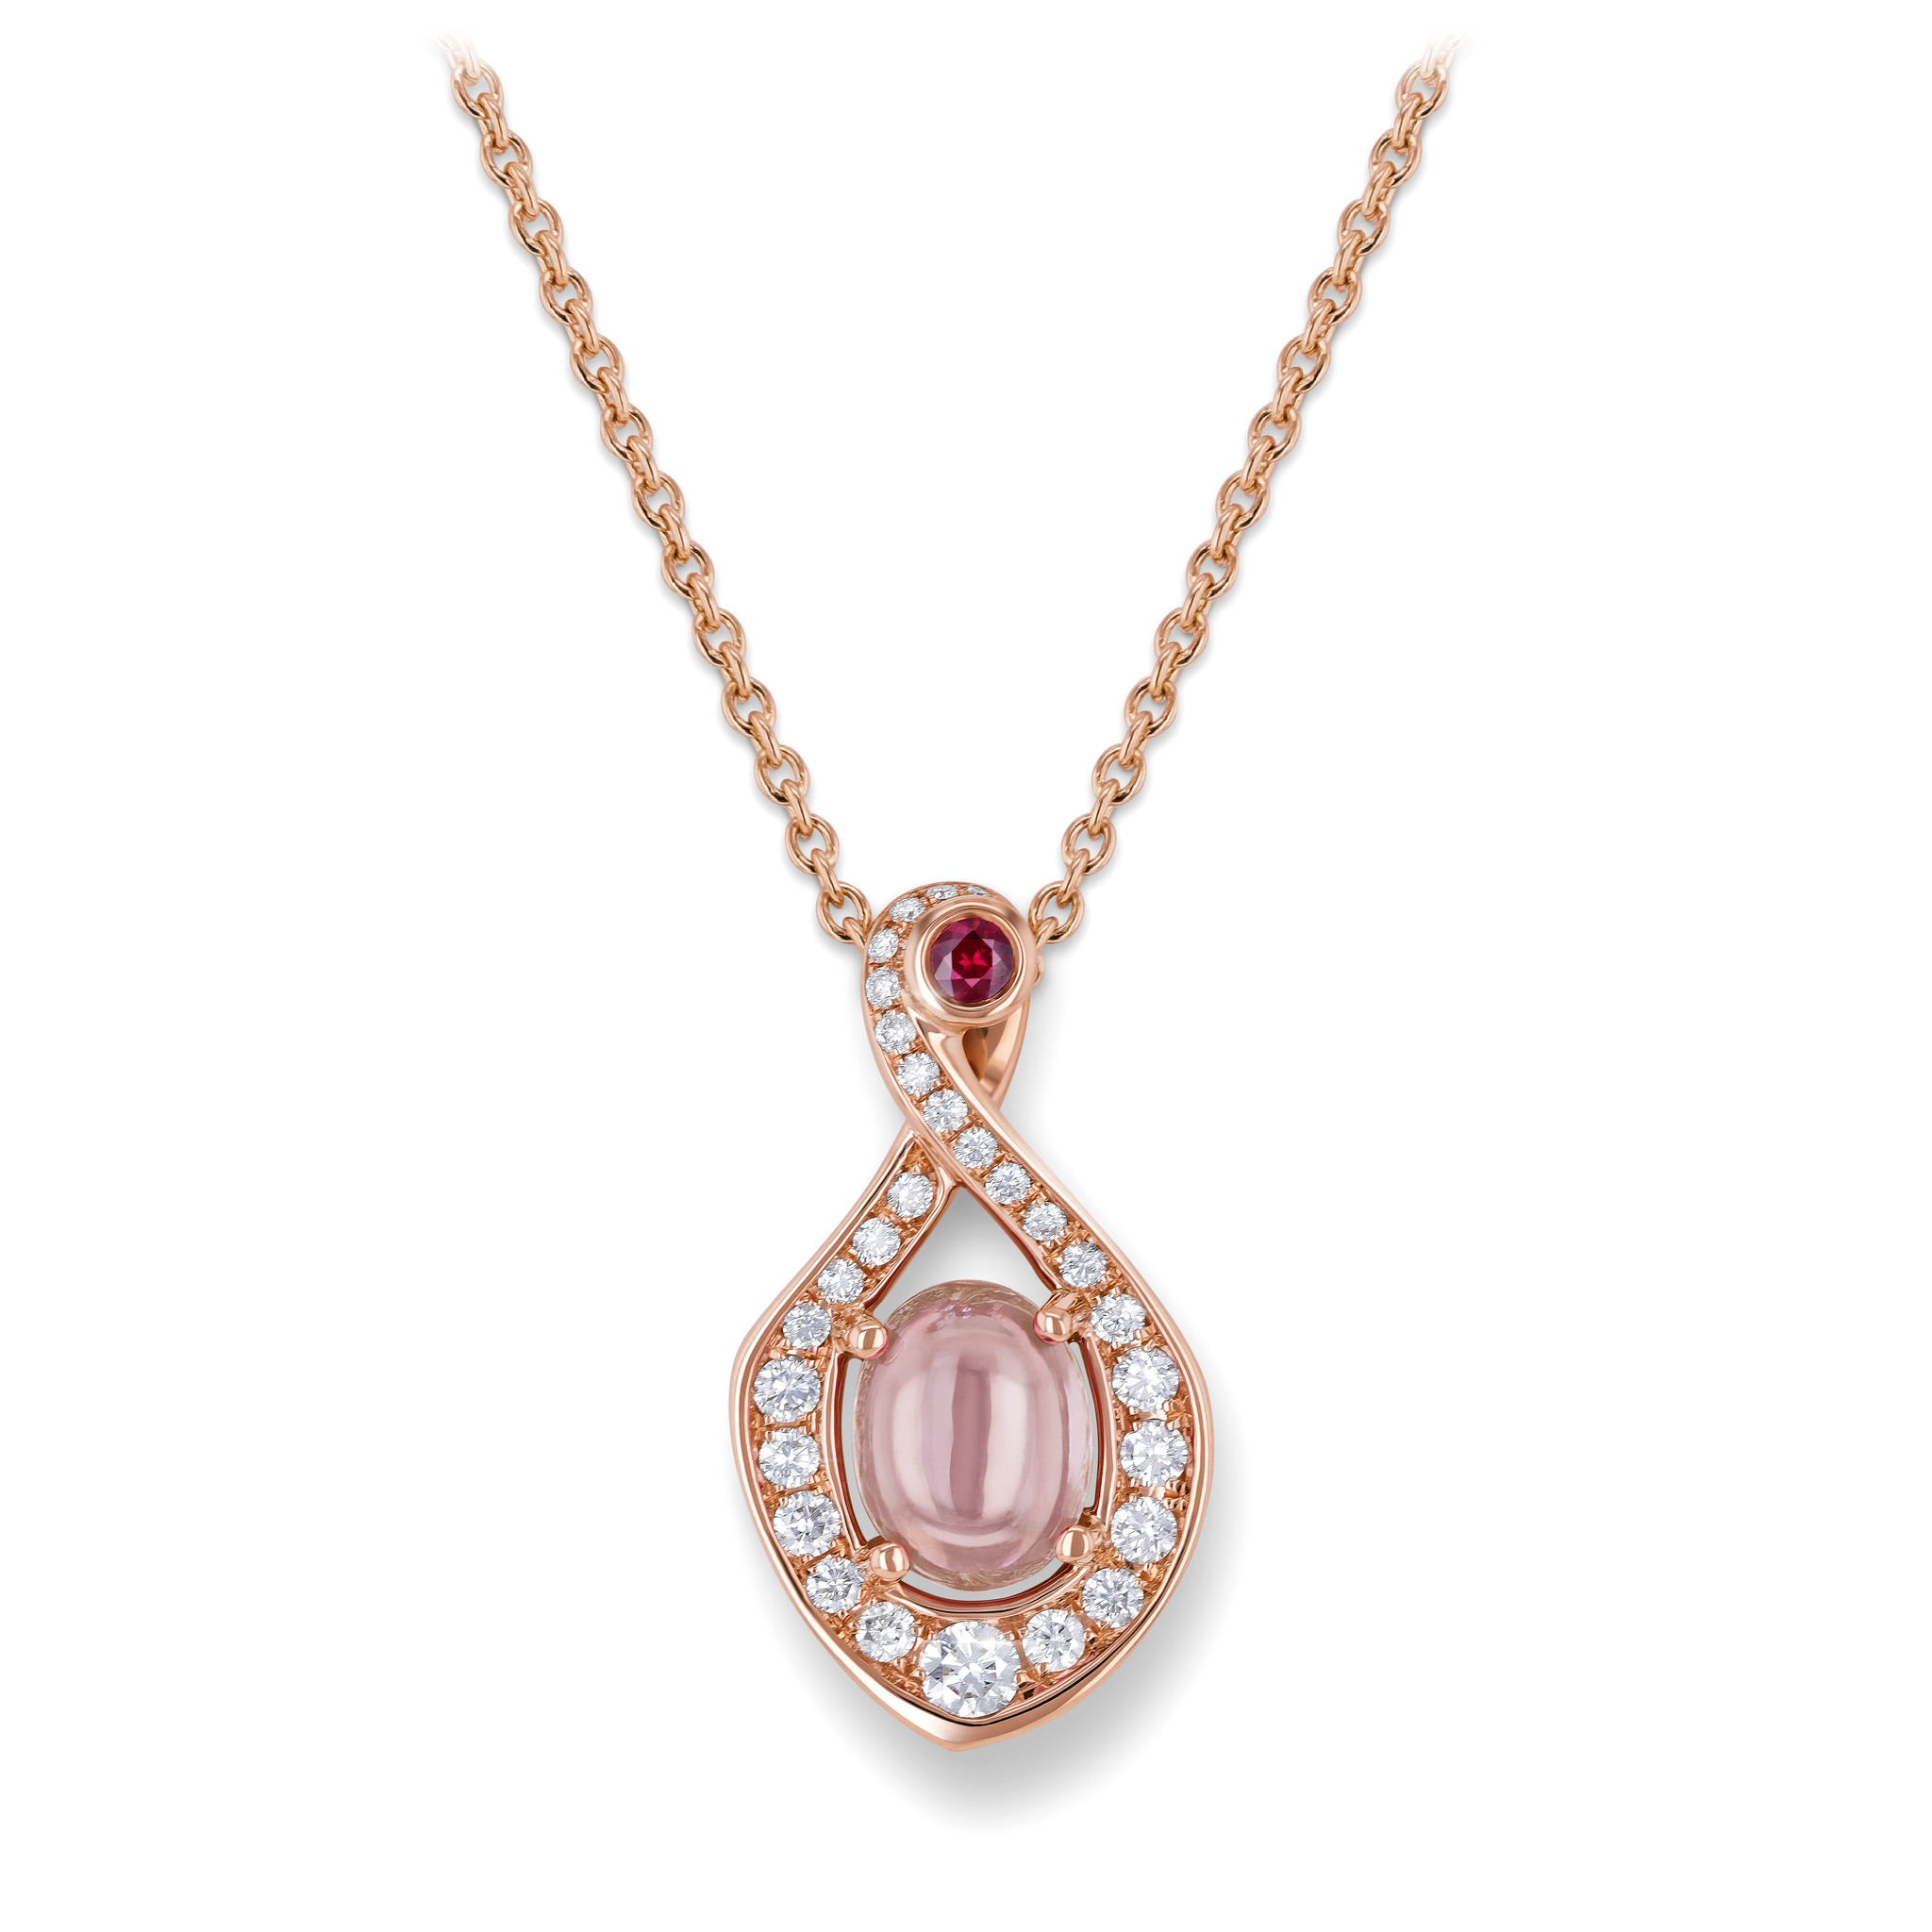 Necklace with morganite